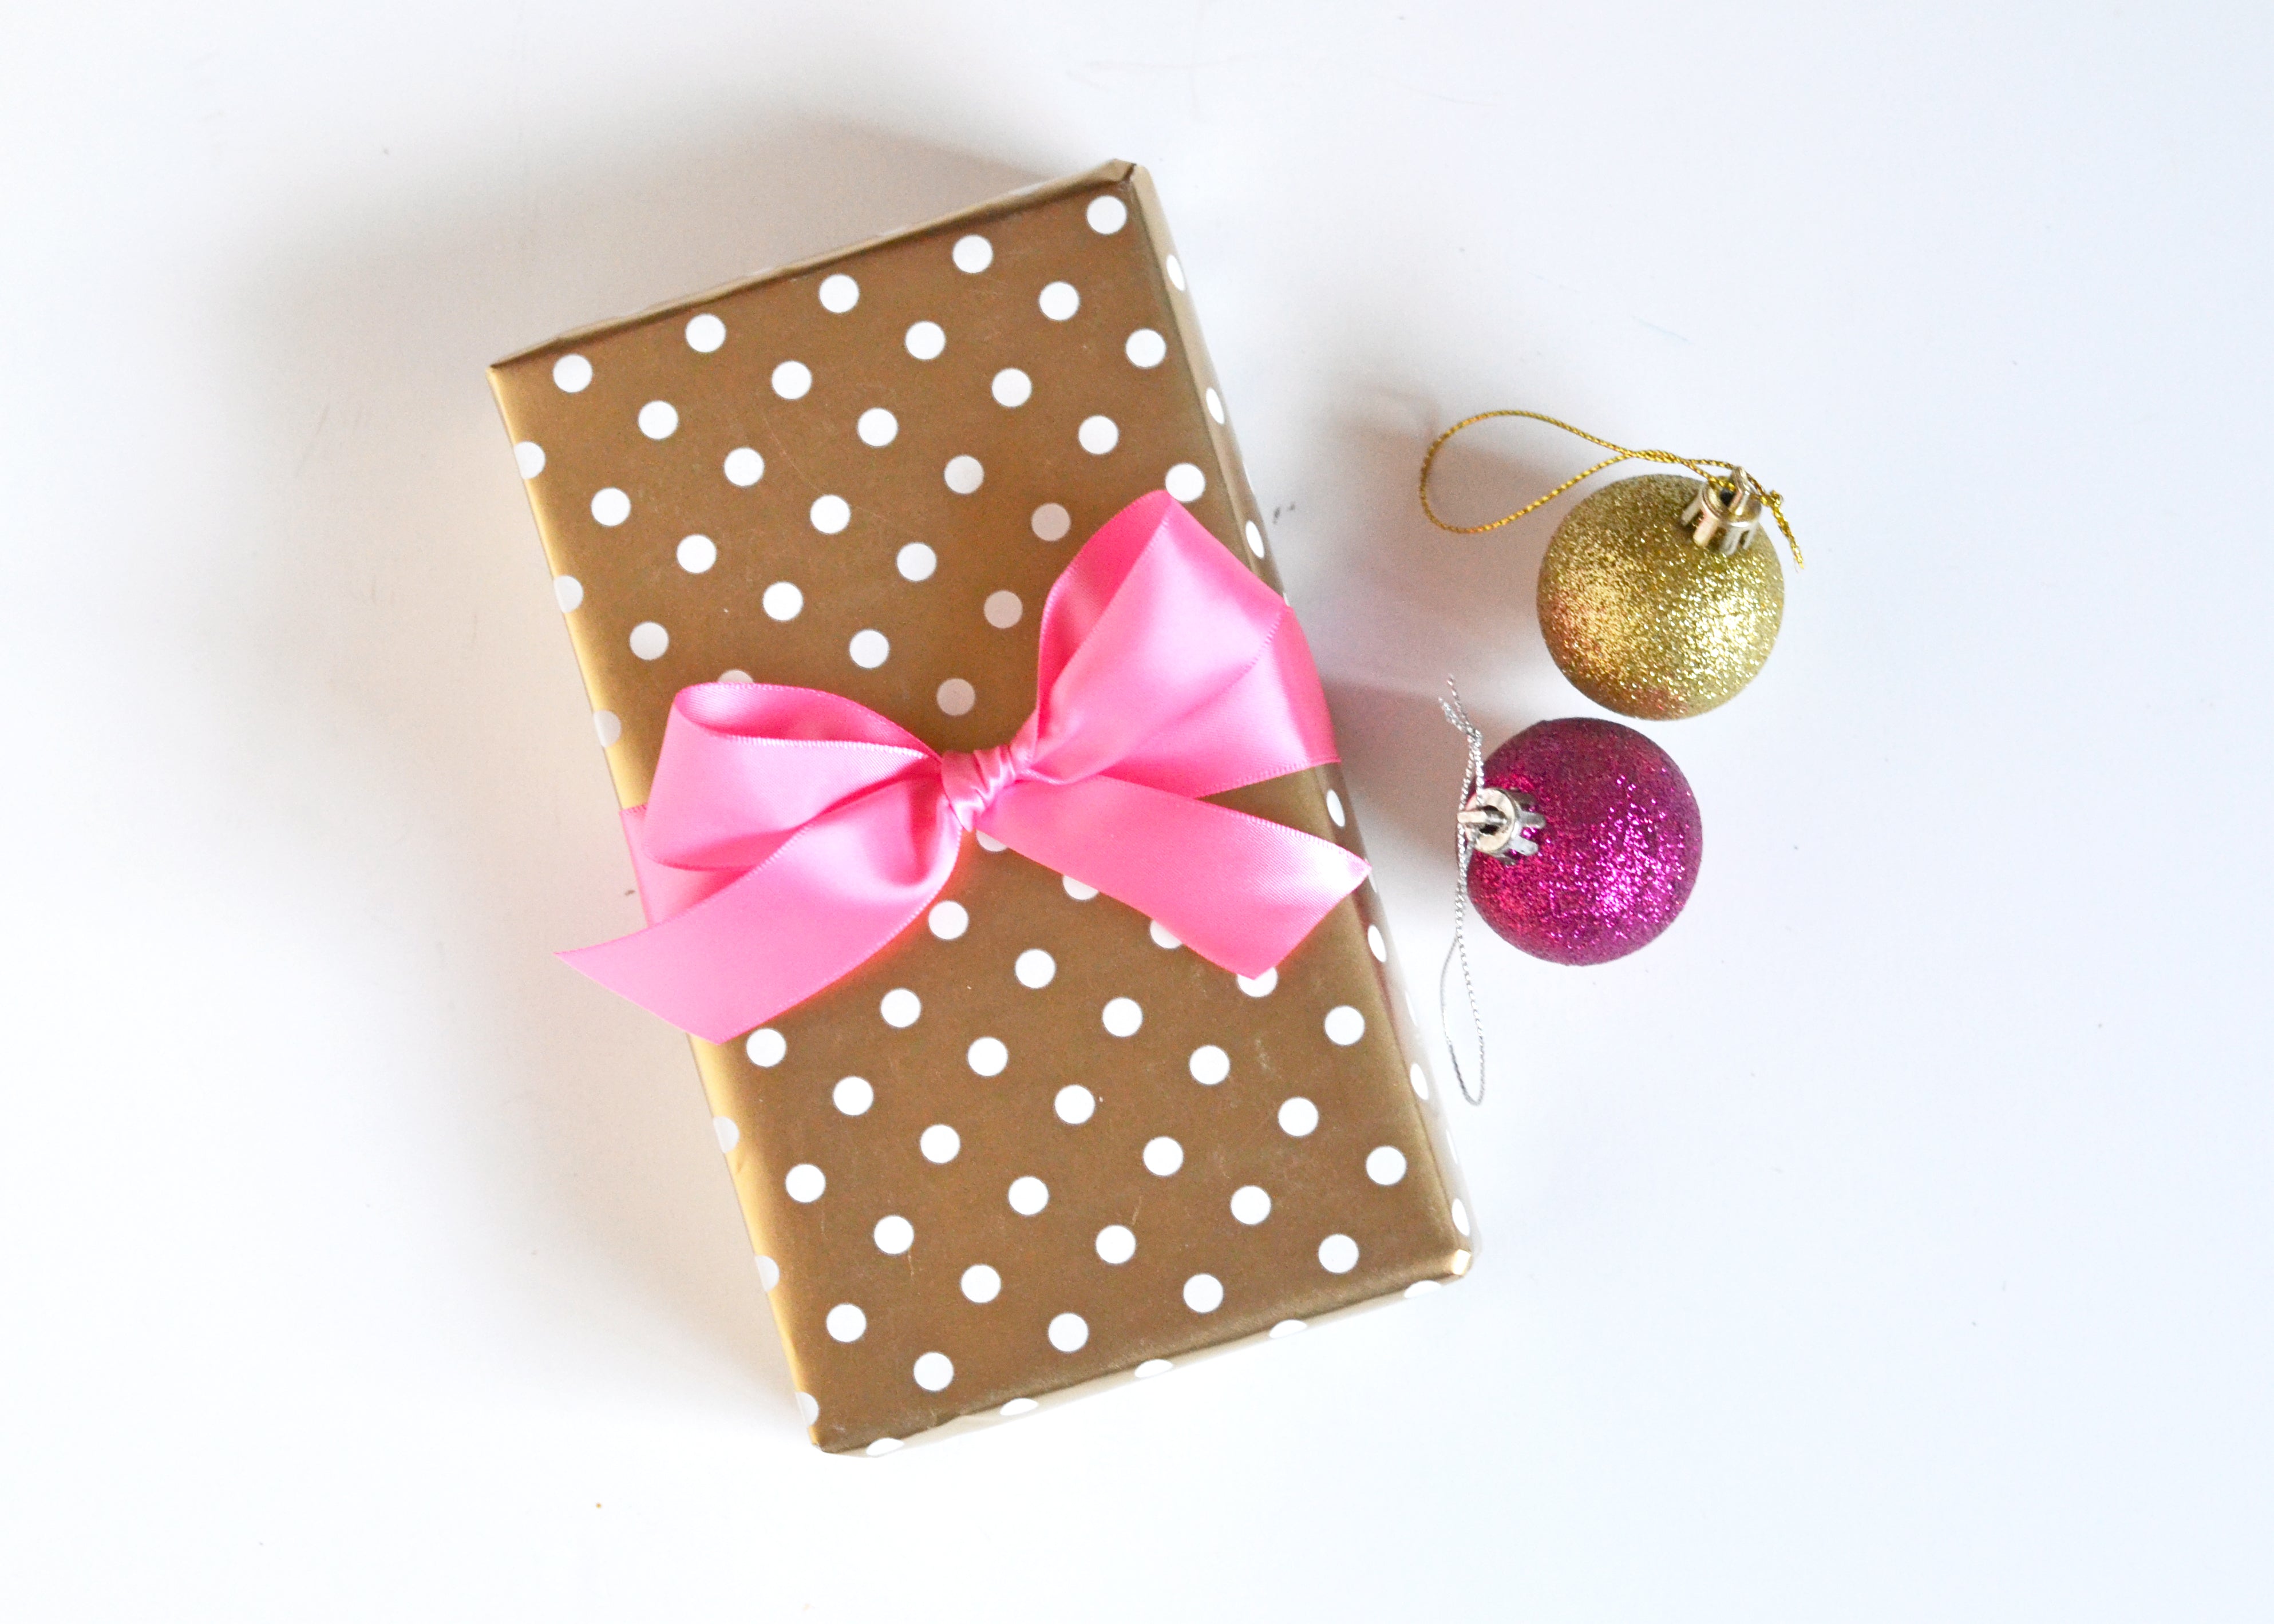 How to Wrap Presents Without Tape: 11 Steps (with Pictures)